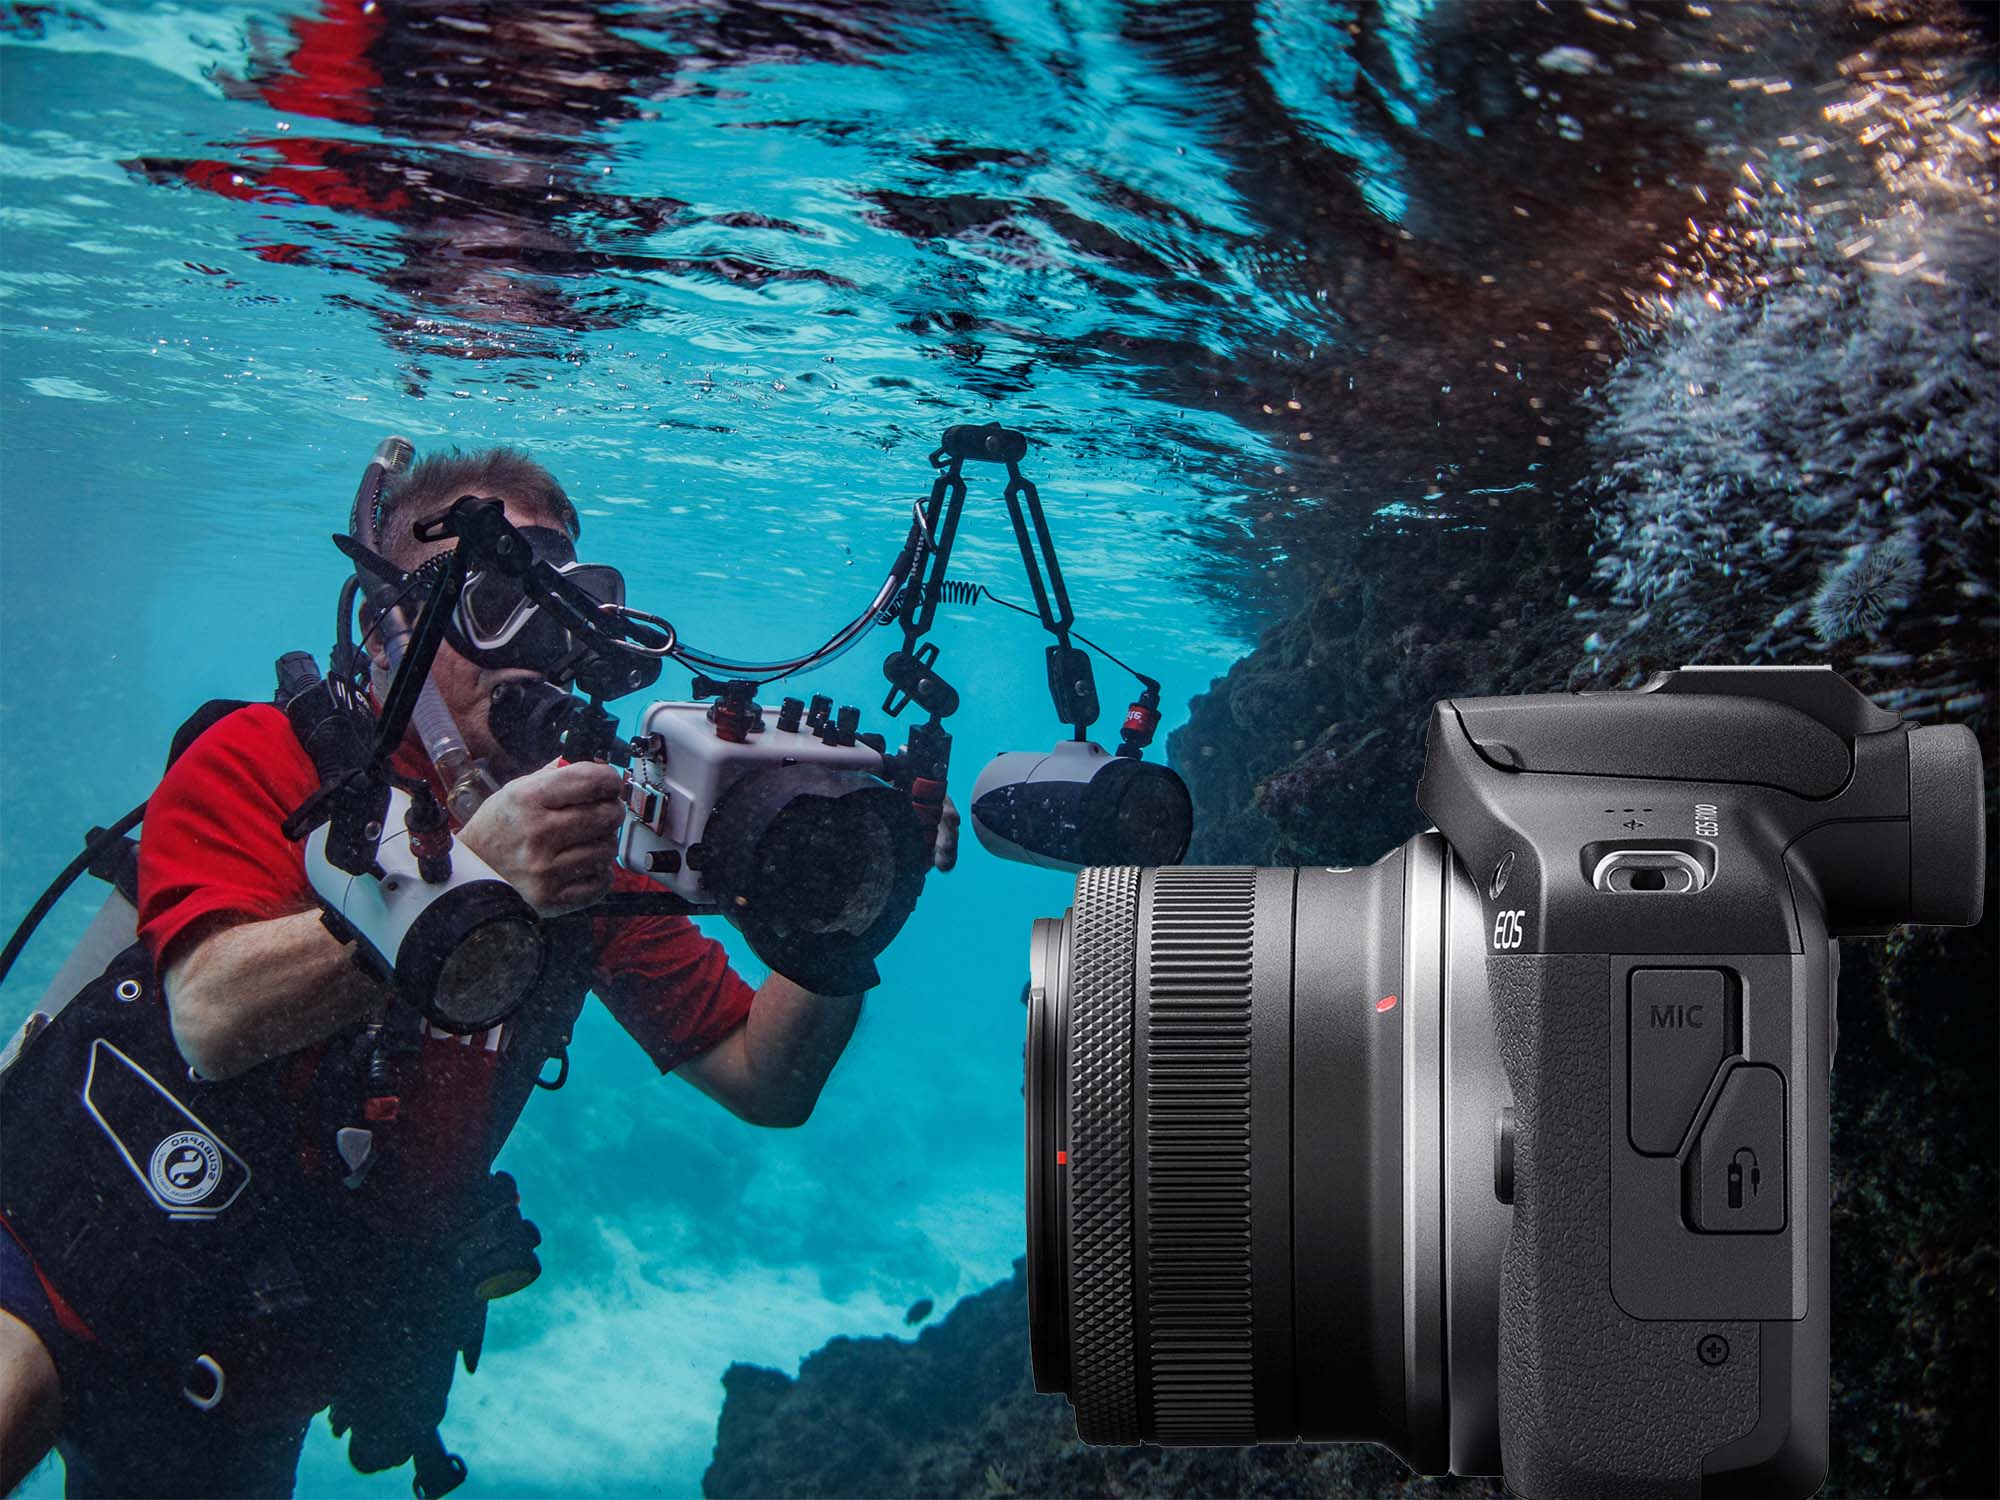 Canon RF 18-45mm f/4.5-6.3 IS STM Lens for Underwater Photography Review & Results